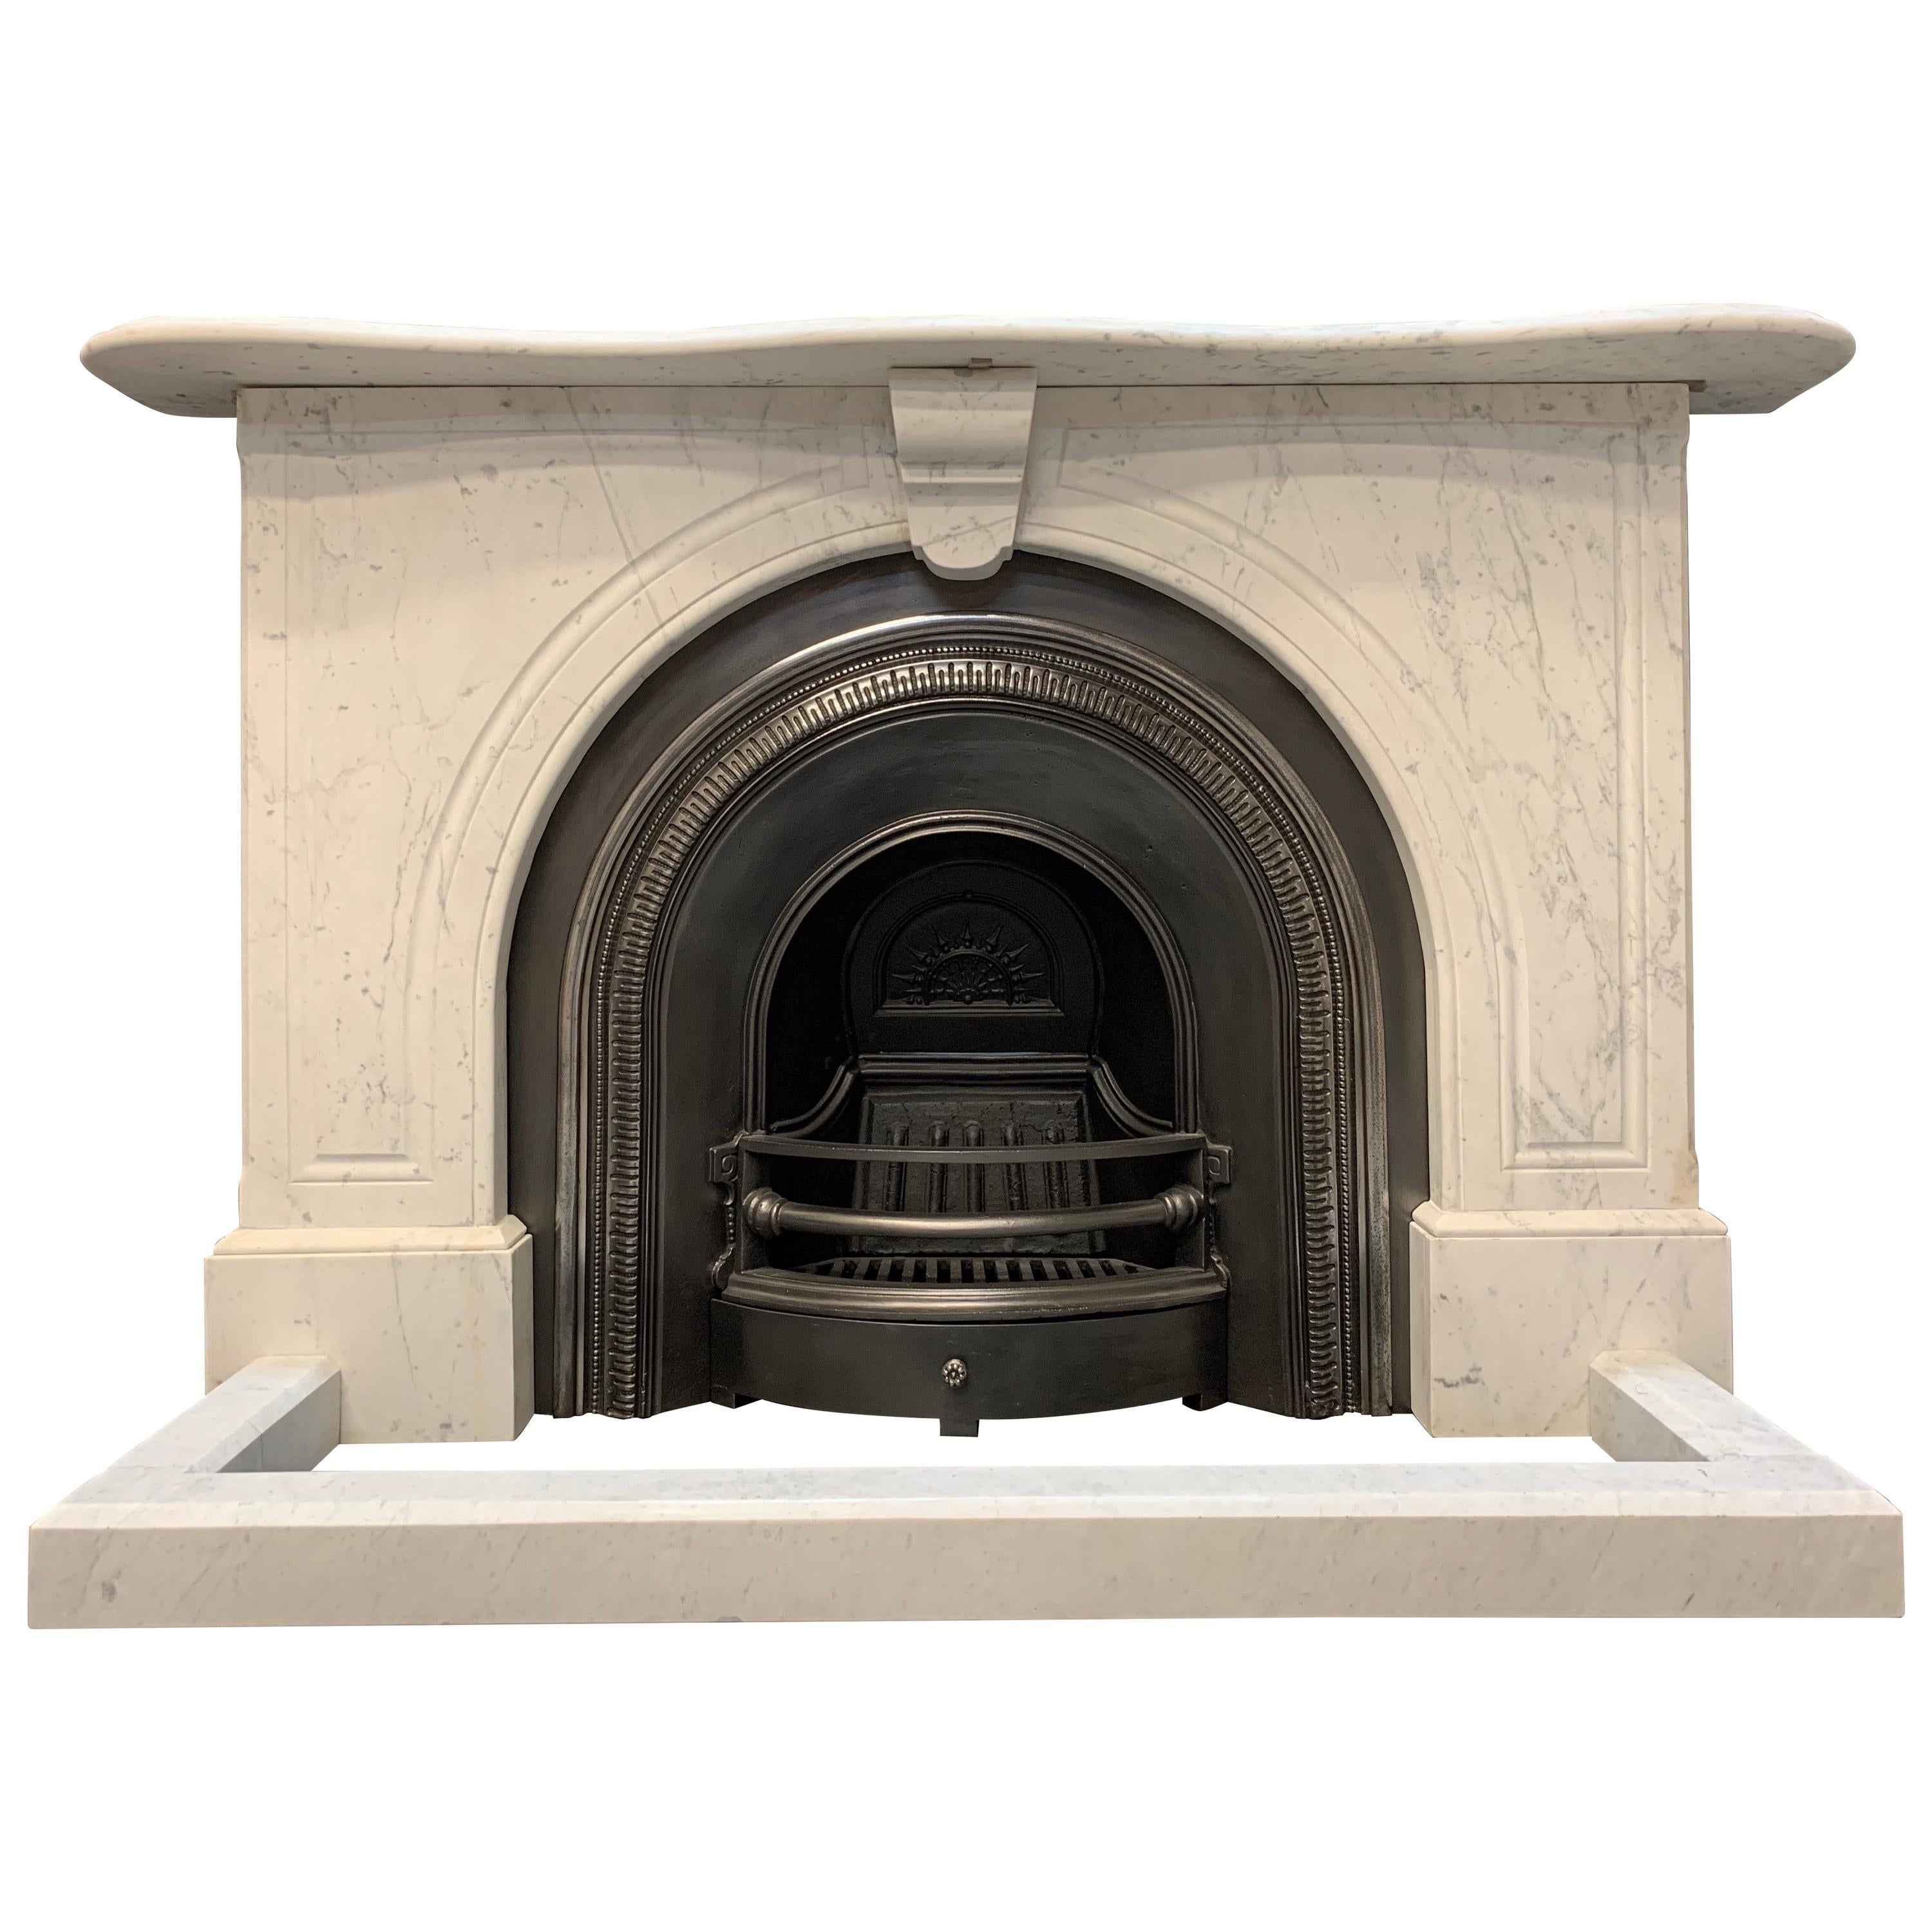 Original 19th Century Victorian Arched Marble Fireplace Surround and Insert